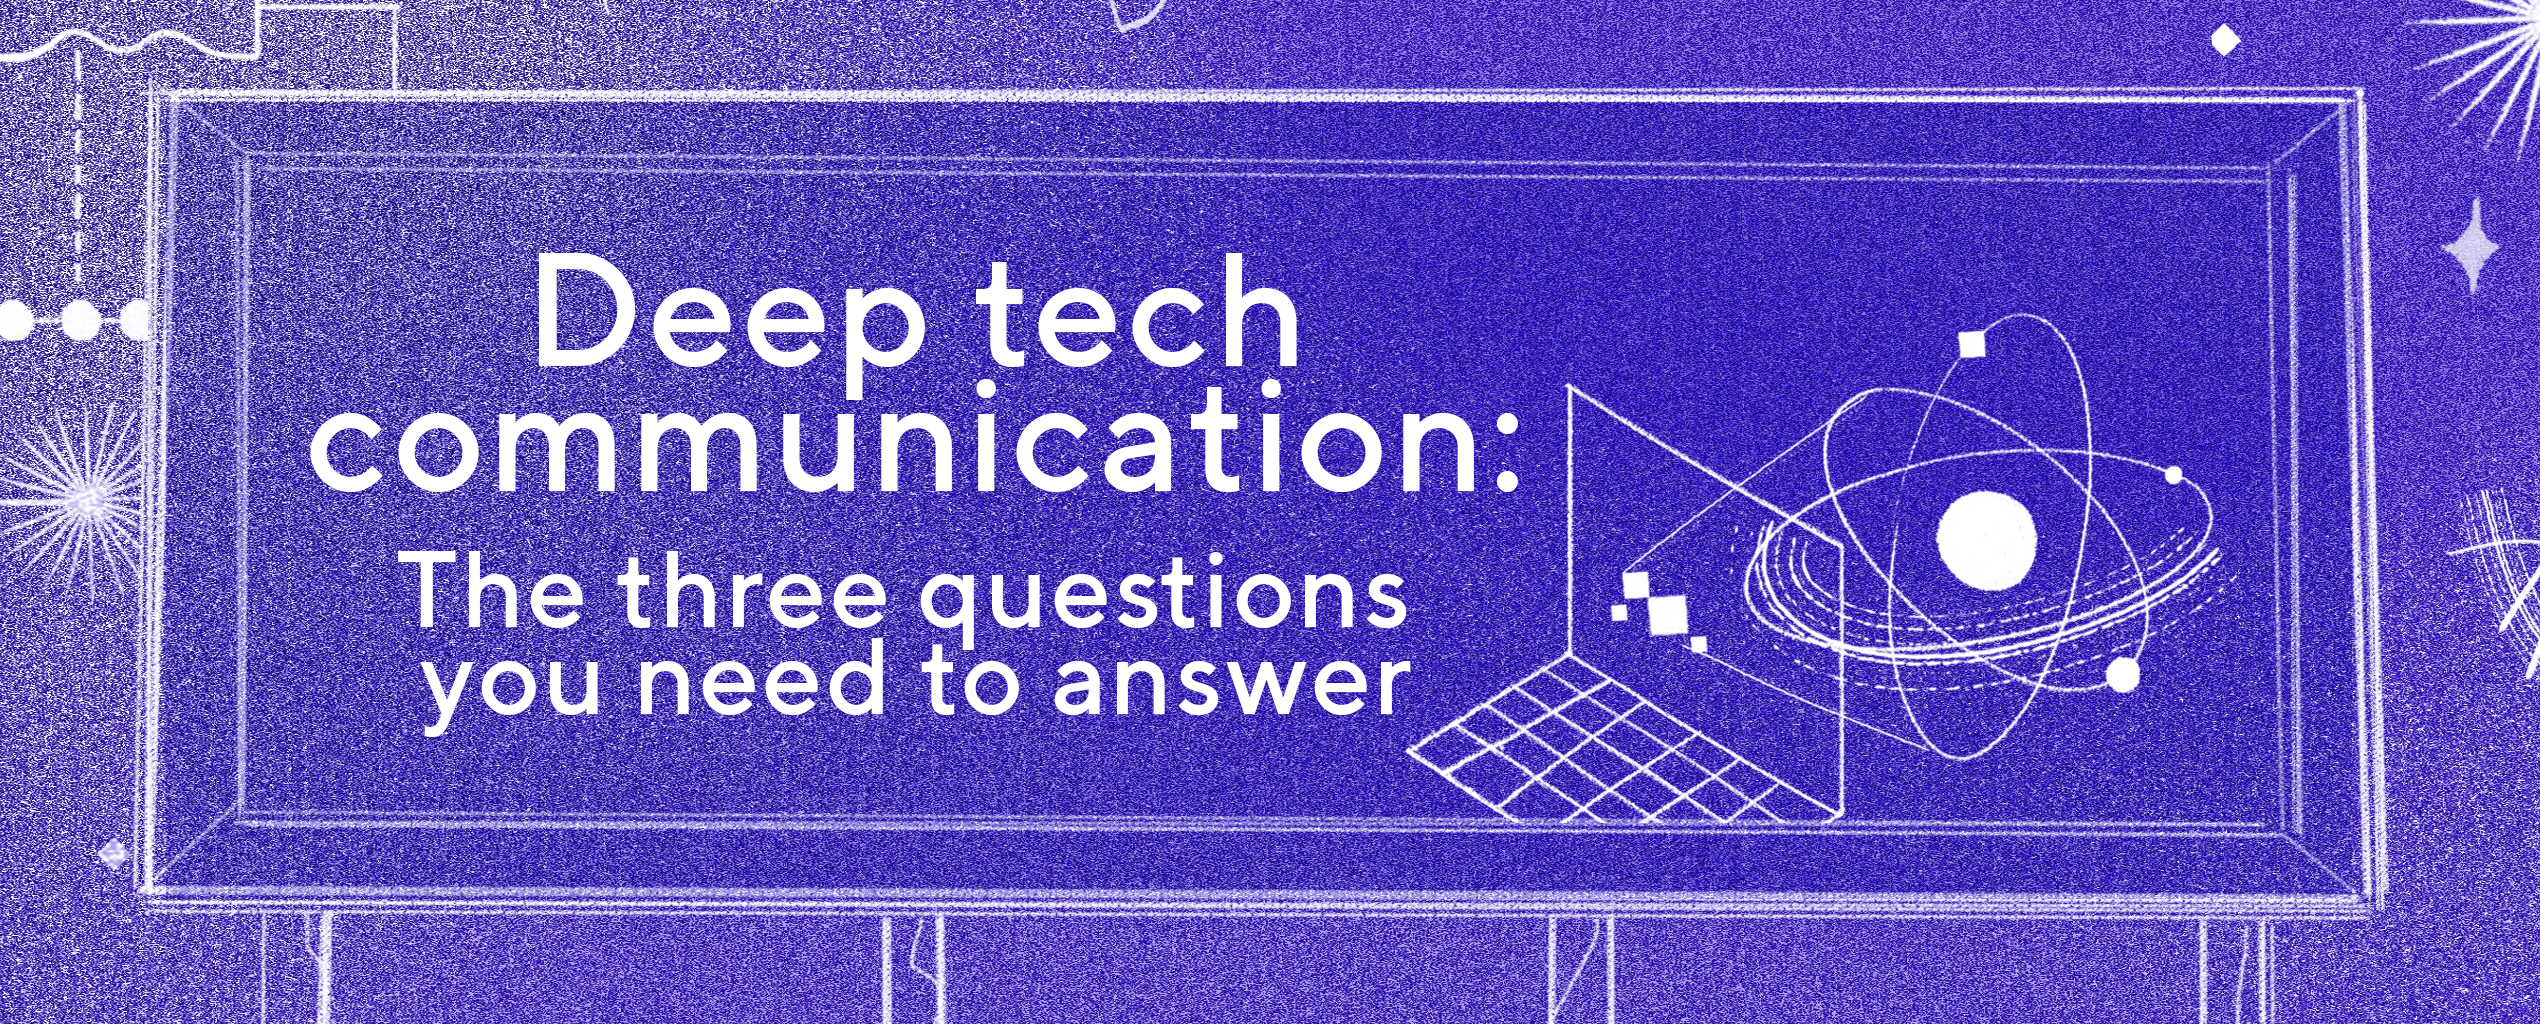 Deep tech communication: the three questions you need to answer